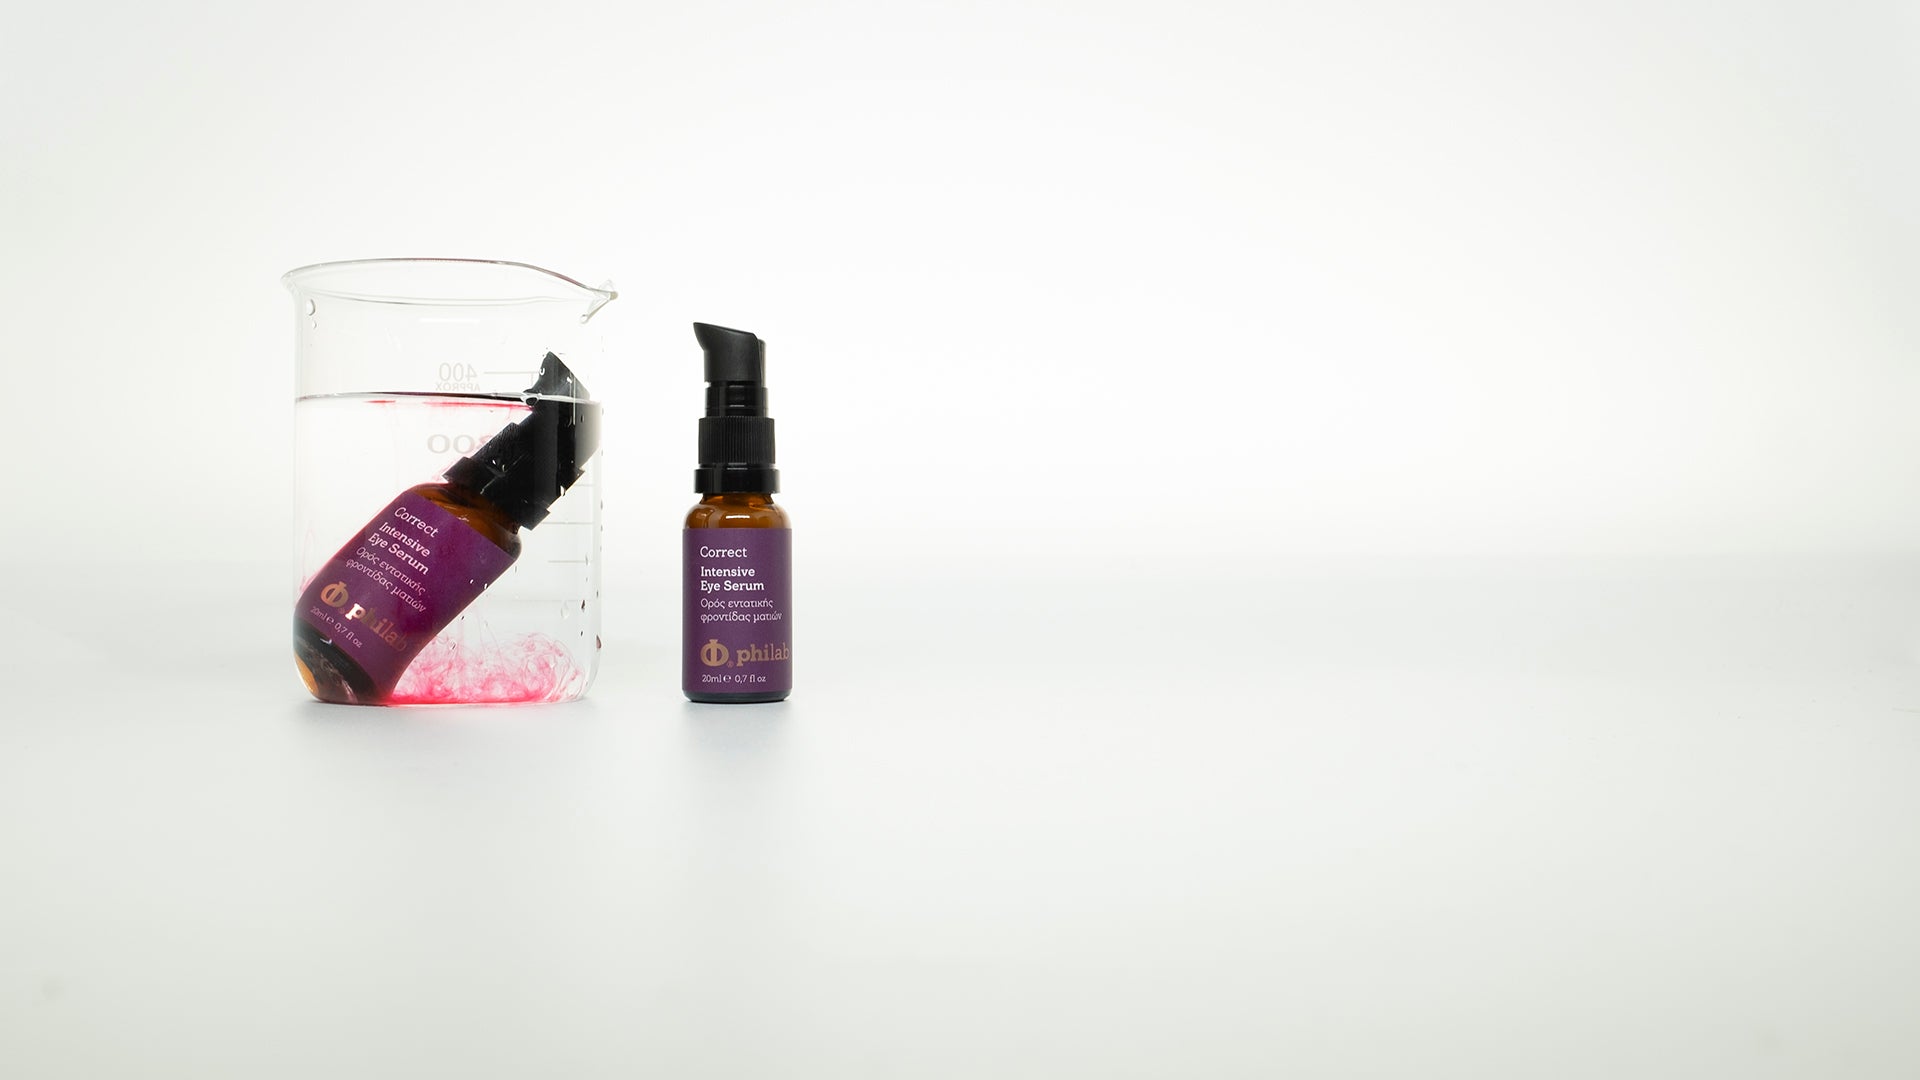 Two Philab skincare Intensive Eye Serums beside a beaker with dissolved pink contents, against a white backdrop.